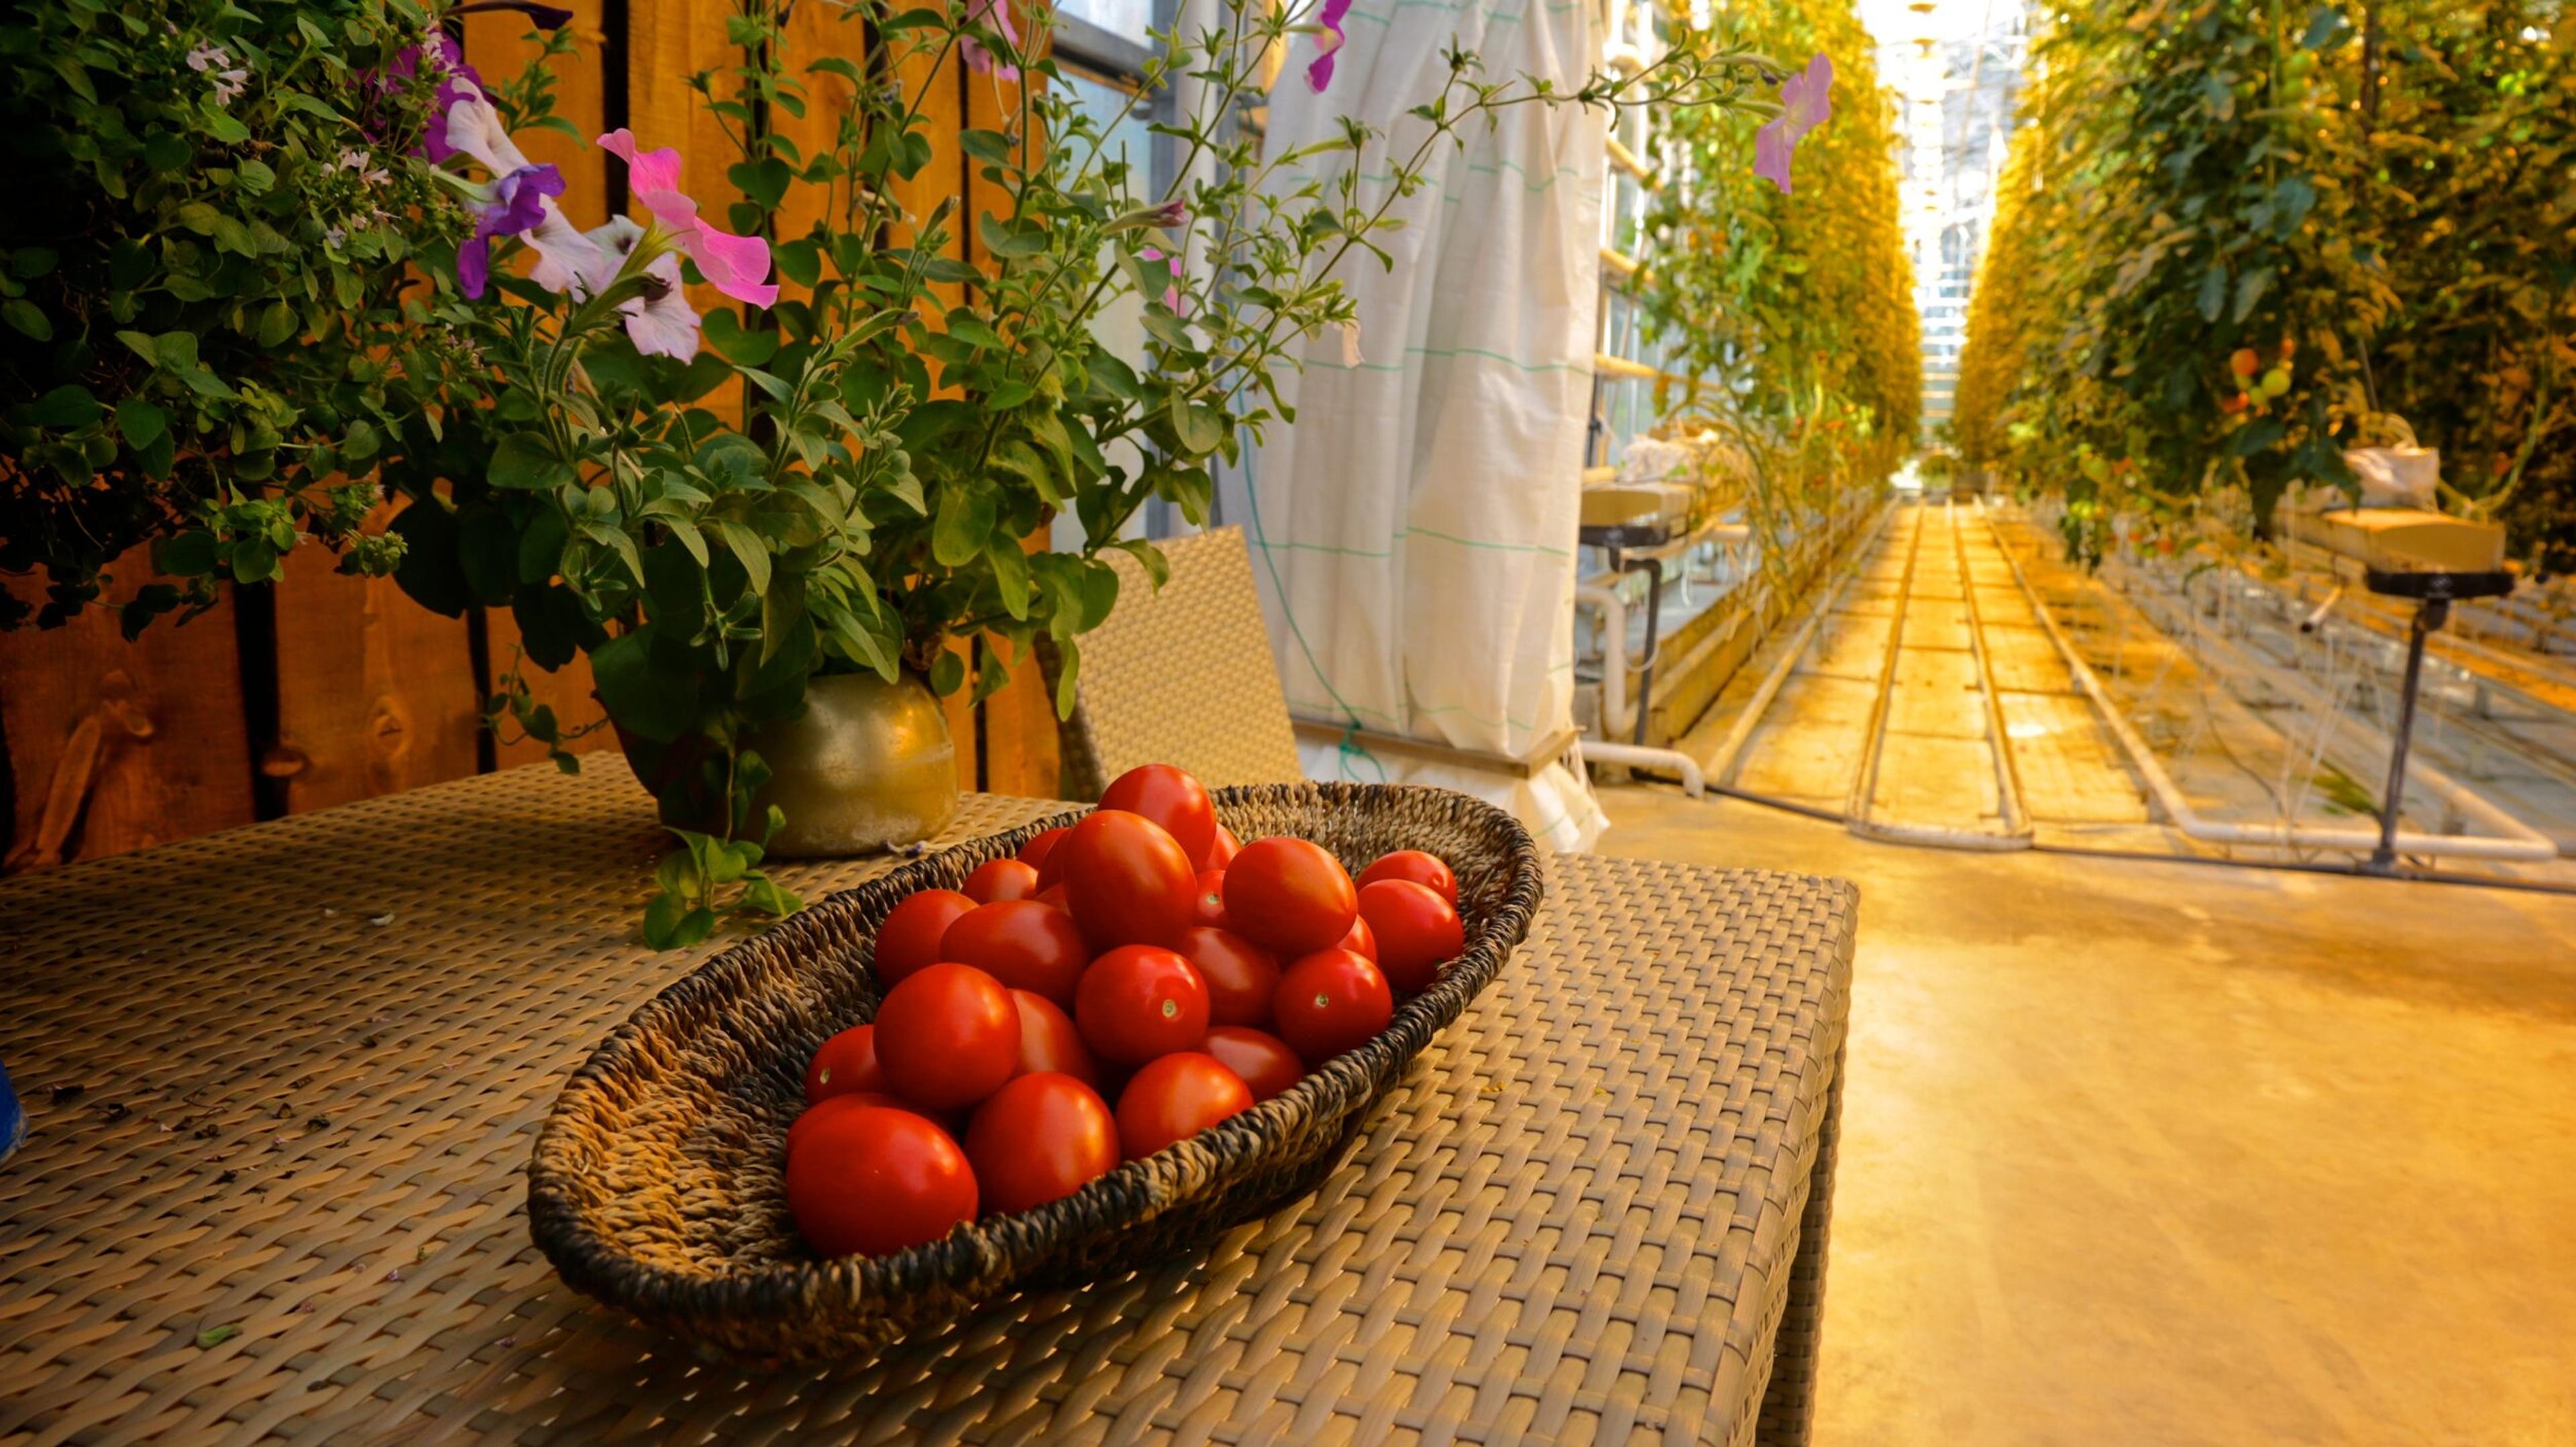 A basket of fresh, ripe tomatoes on a woven mat, with lush greenery in the background, evoking a sense of homegrown abundance and the simple pleasures of garden-to-table living.